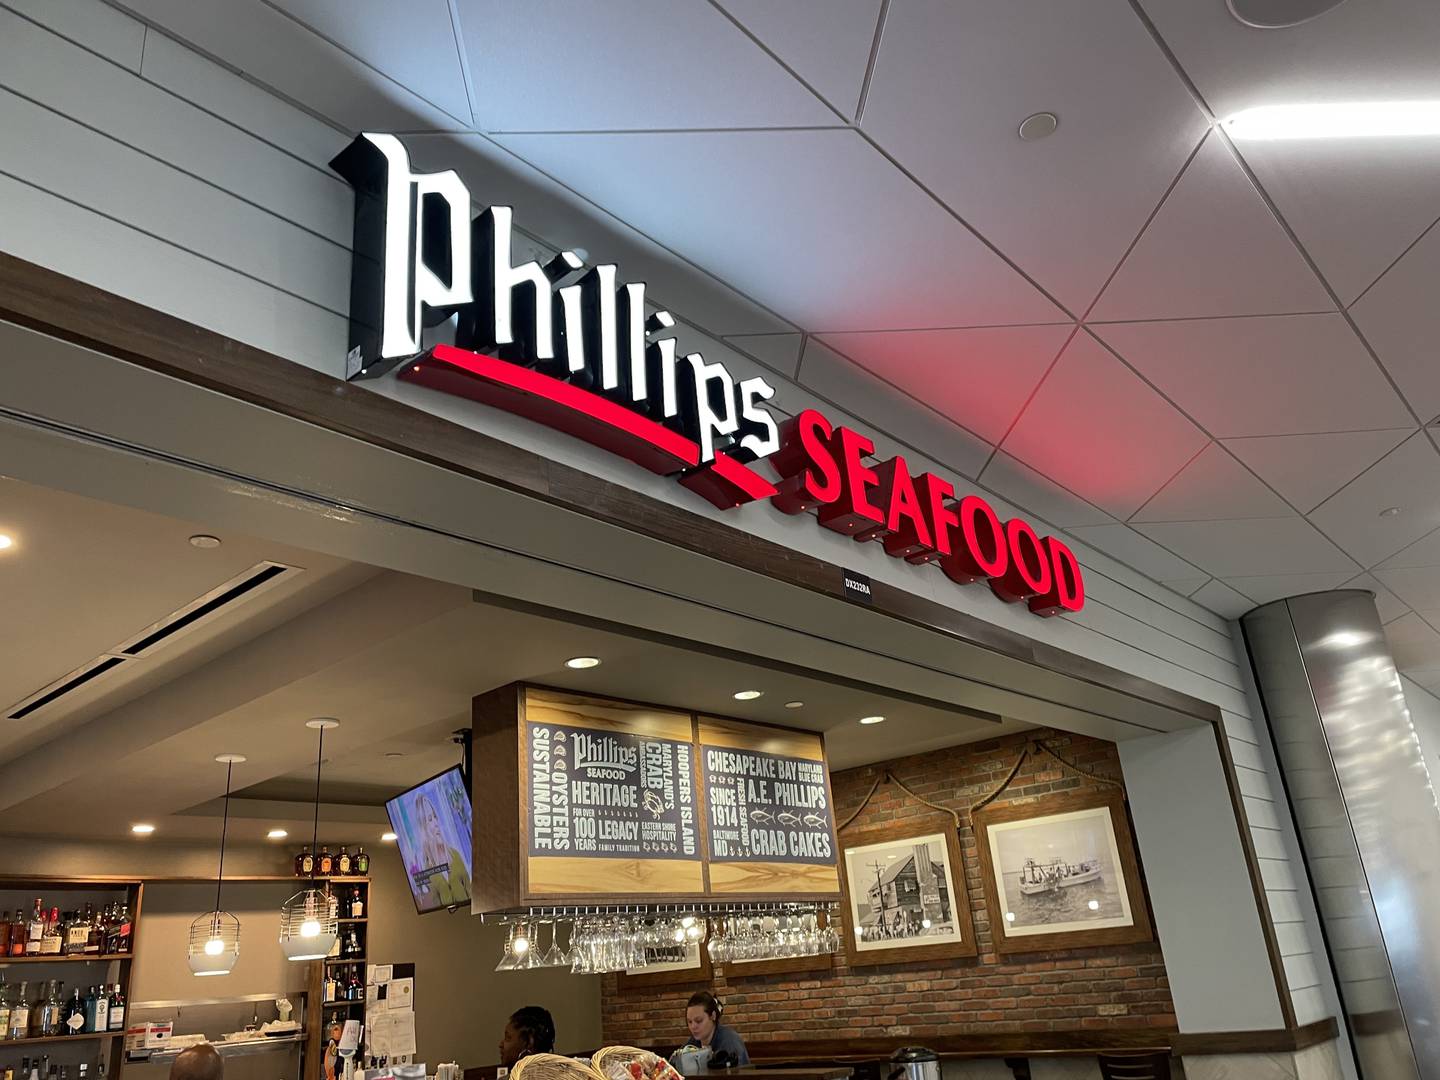 Maryland restaurant Phillips Seafood has a branch at BWI.